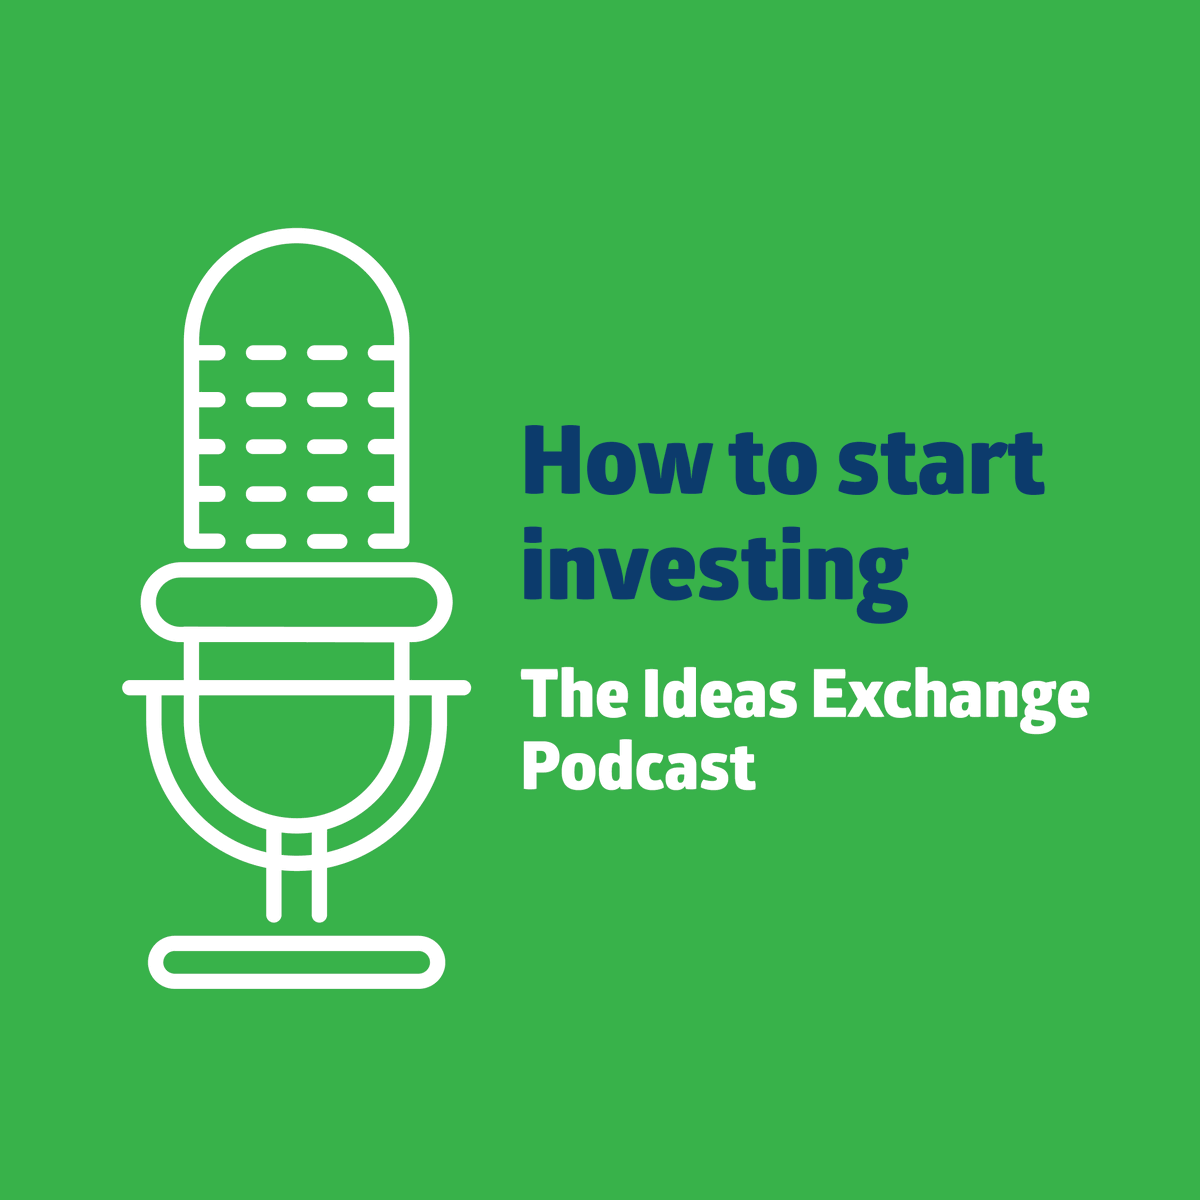 New to investing and not sure where to get started? In this episode of #ASXIdeasExchange we review the risks of different asset classes, the importance of diversification, the benefits of compound interest and much more. 🎧 Listen now: bit.ly/3yaaZAw